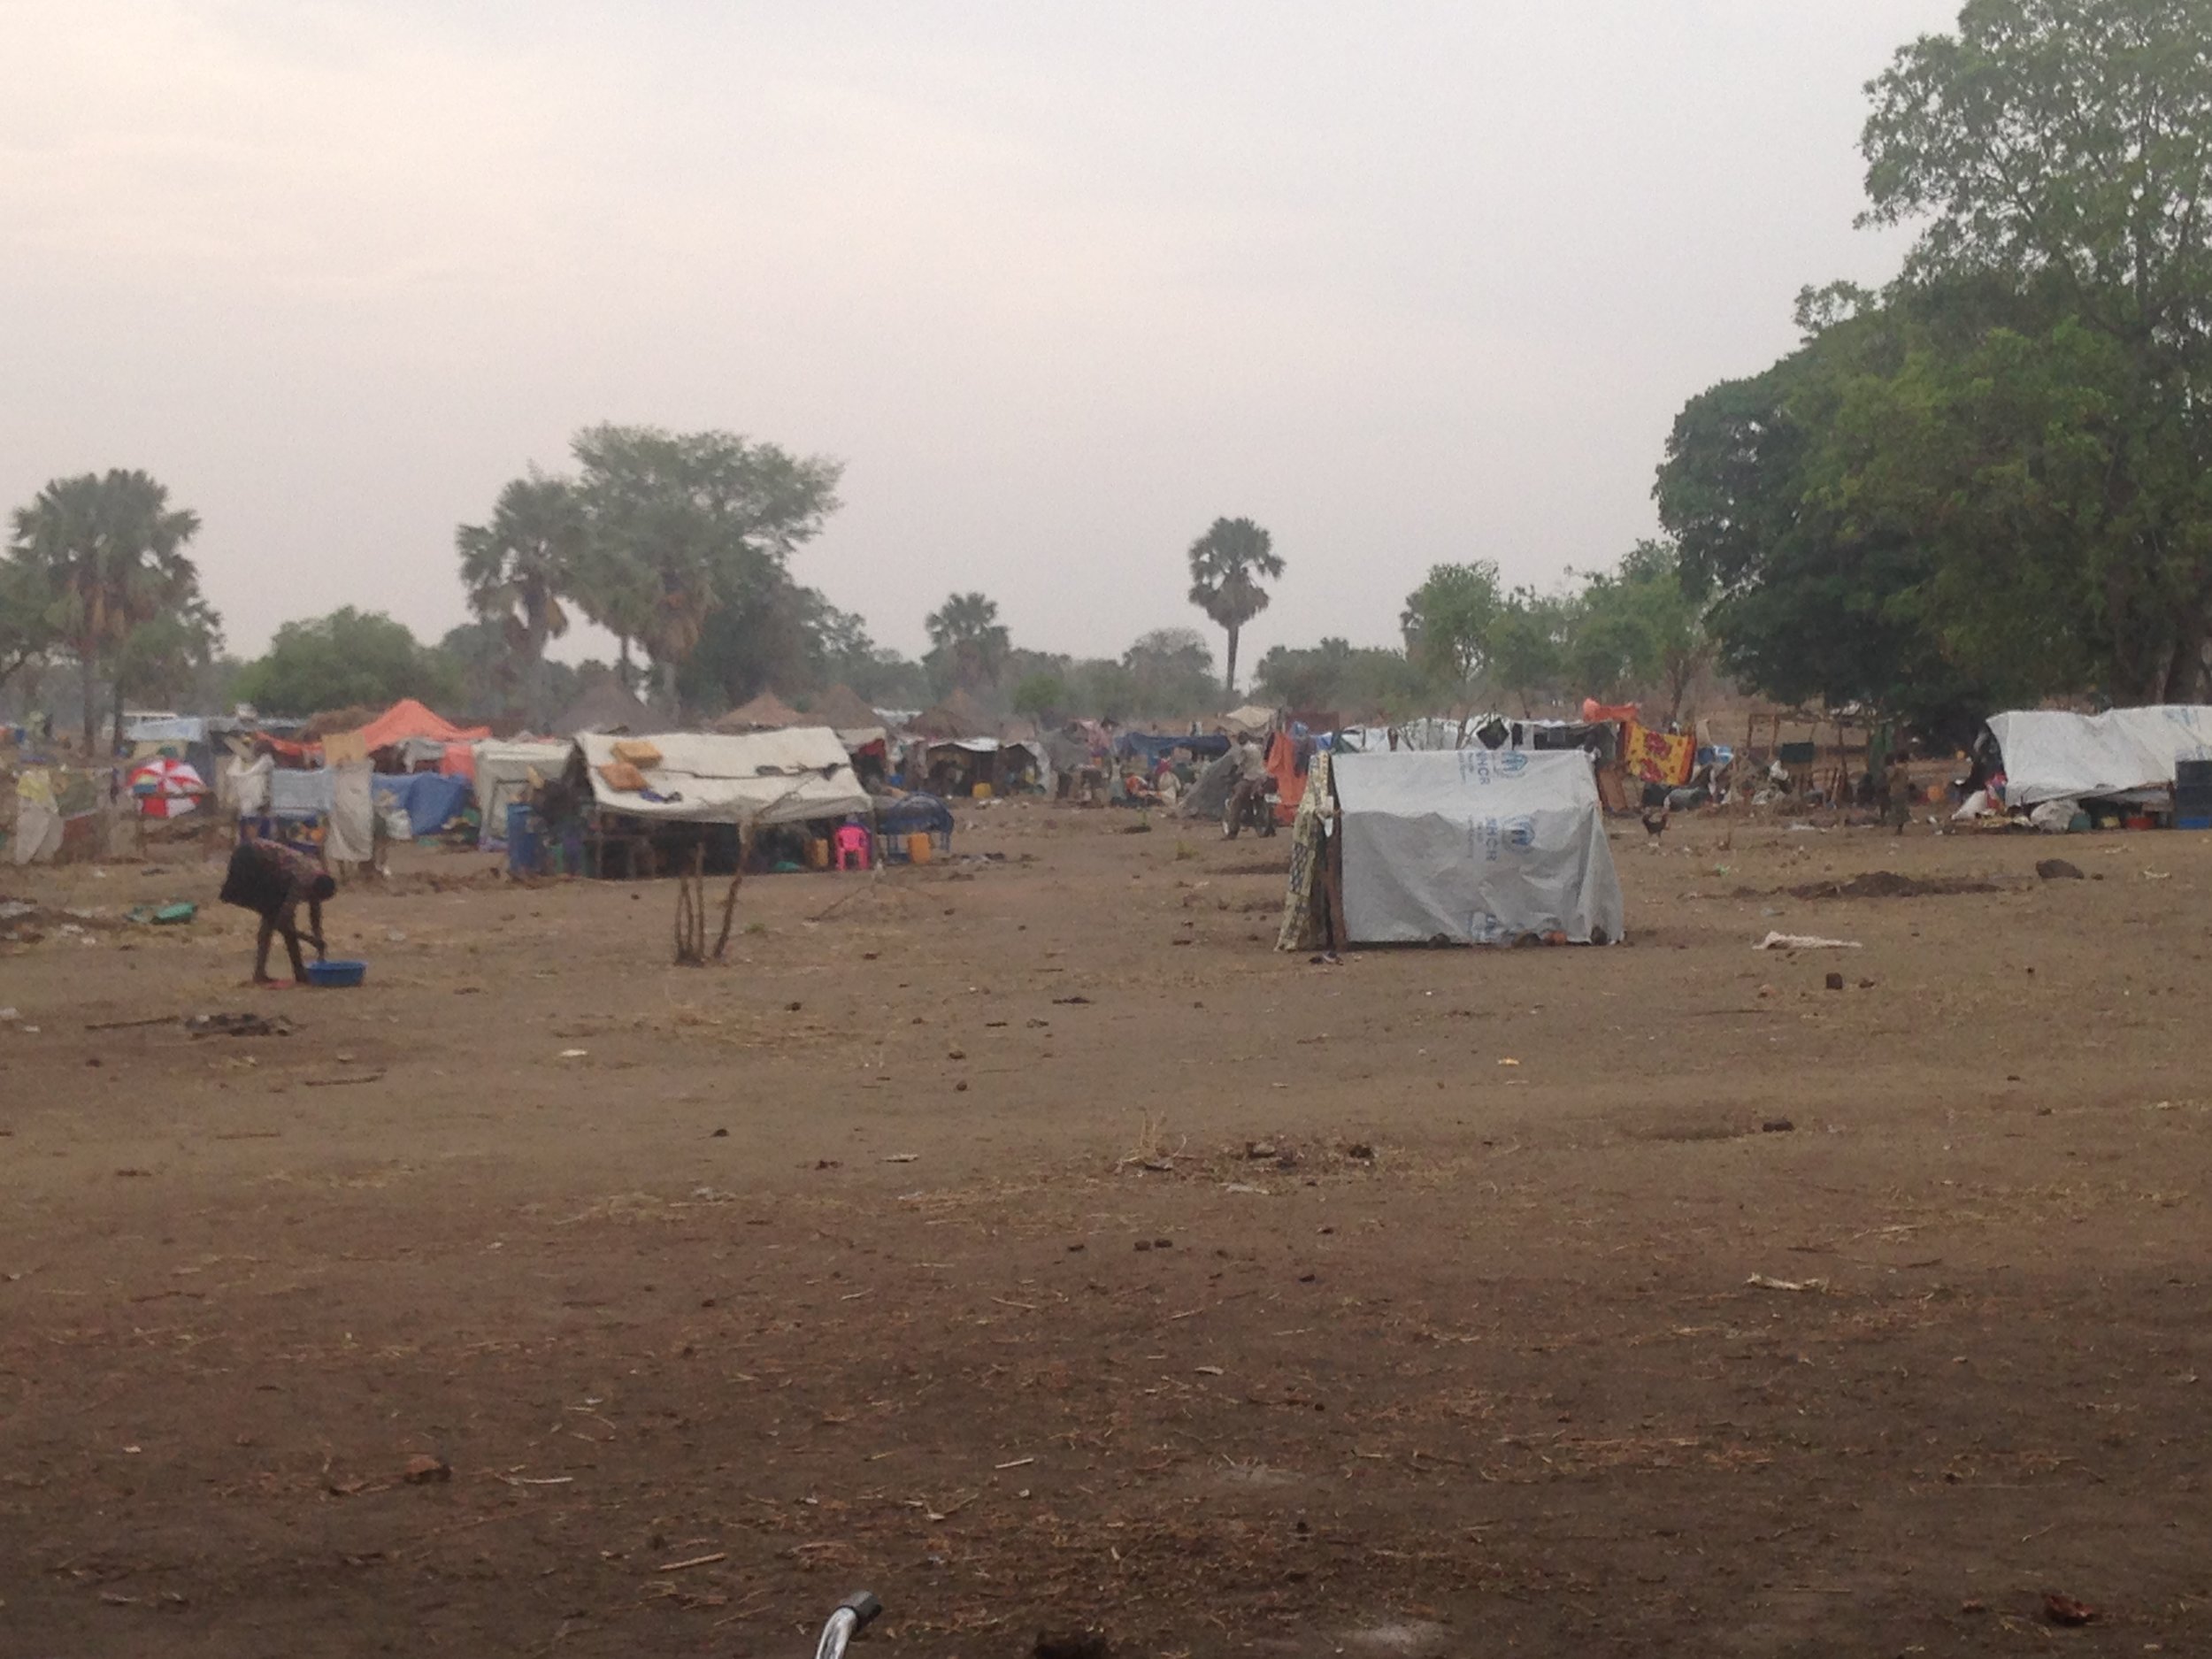   The Healing Kadi Foundation   providing sustainable health care to the people of South Sudan   Mission  